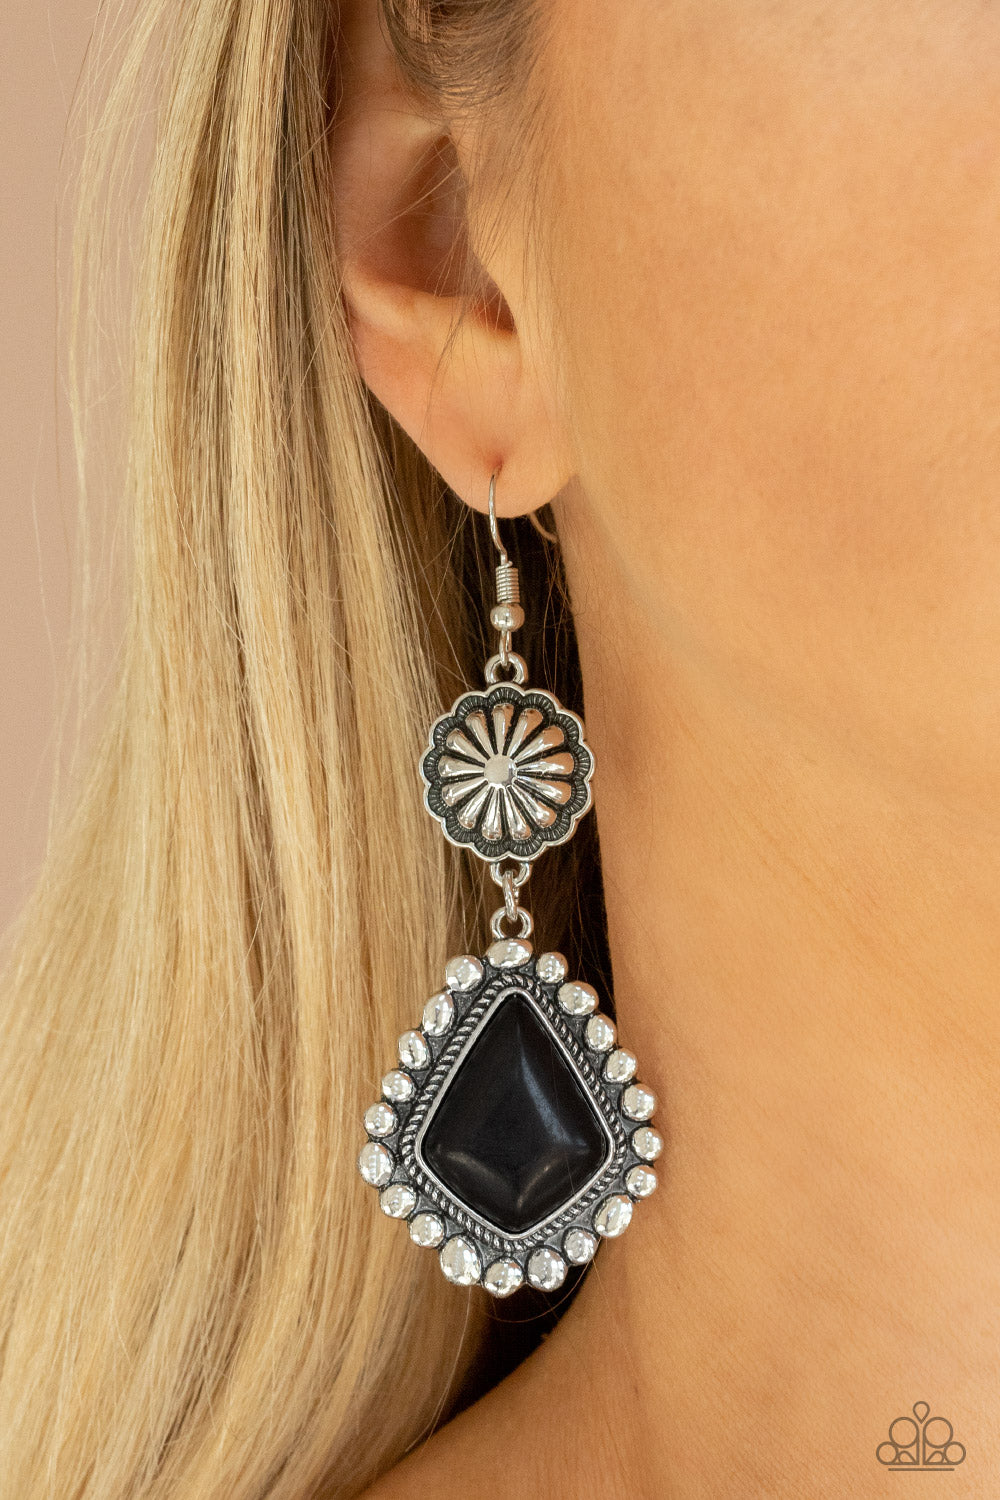 Country Cavalier- Black and Silver Earrings- Paparazzi Accessories